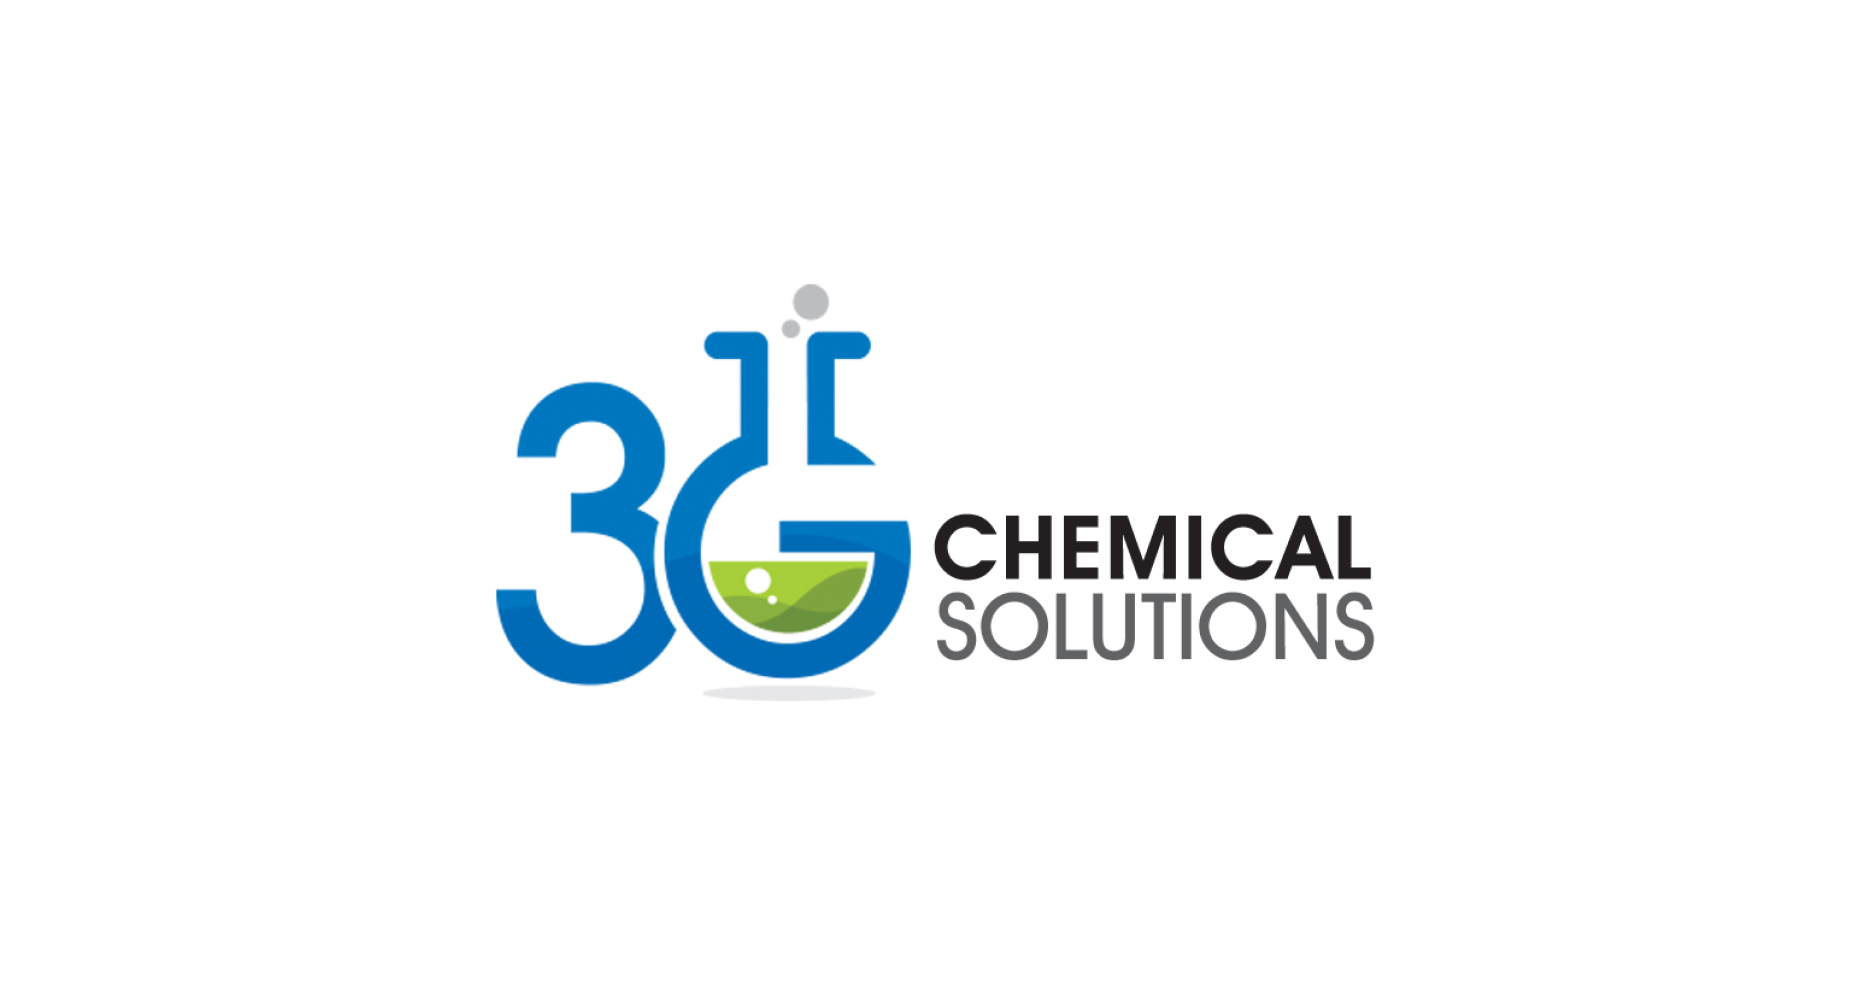 3G Chemical Solutions logo